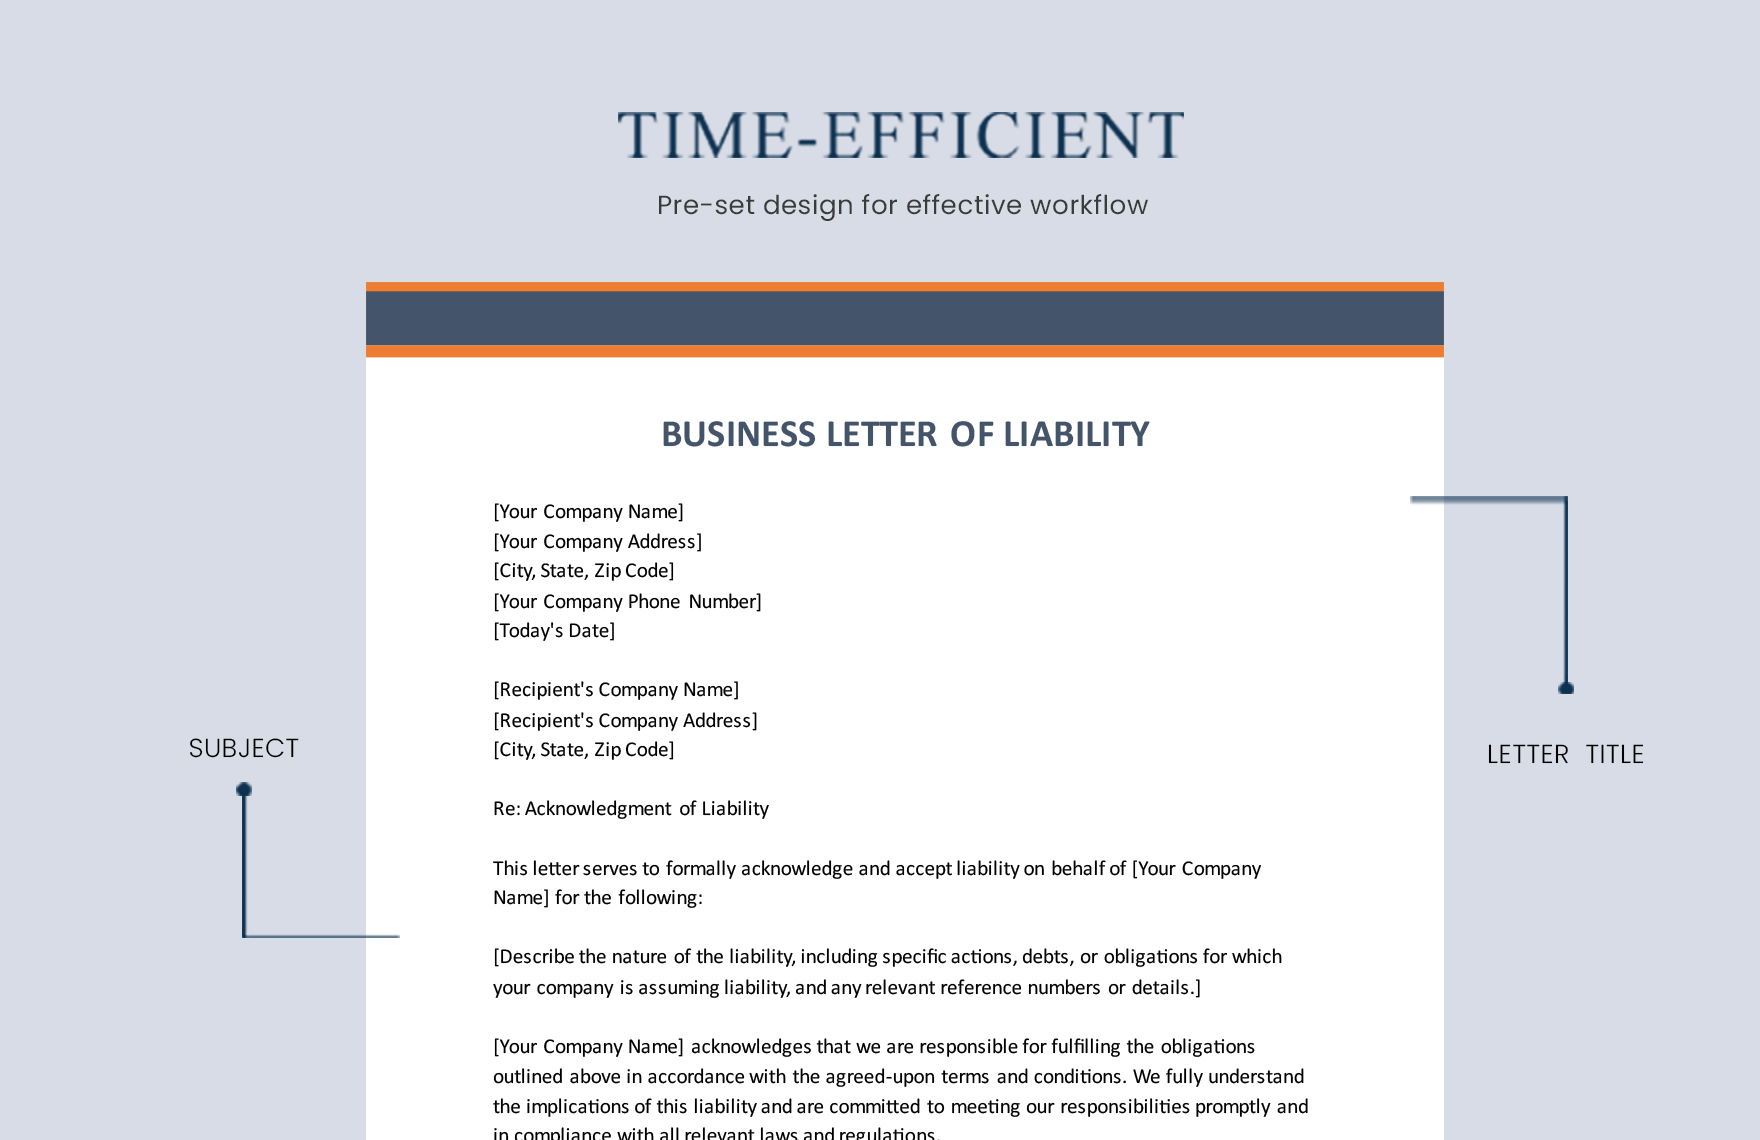 Business Letter Of Liability